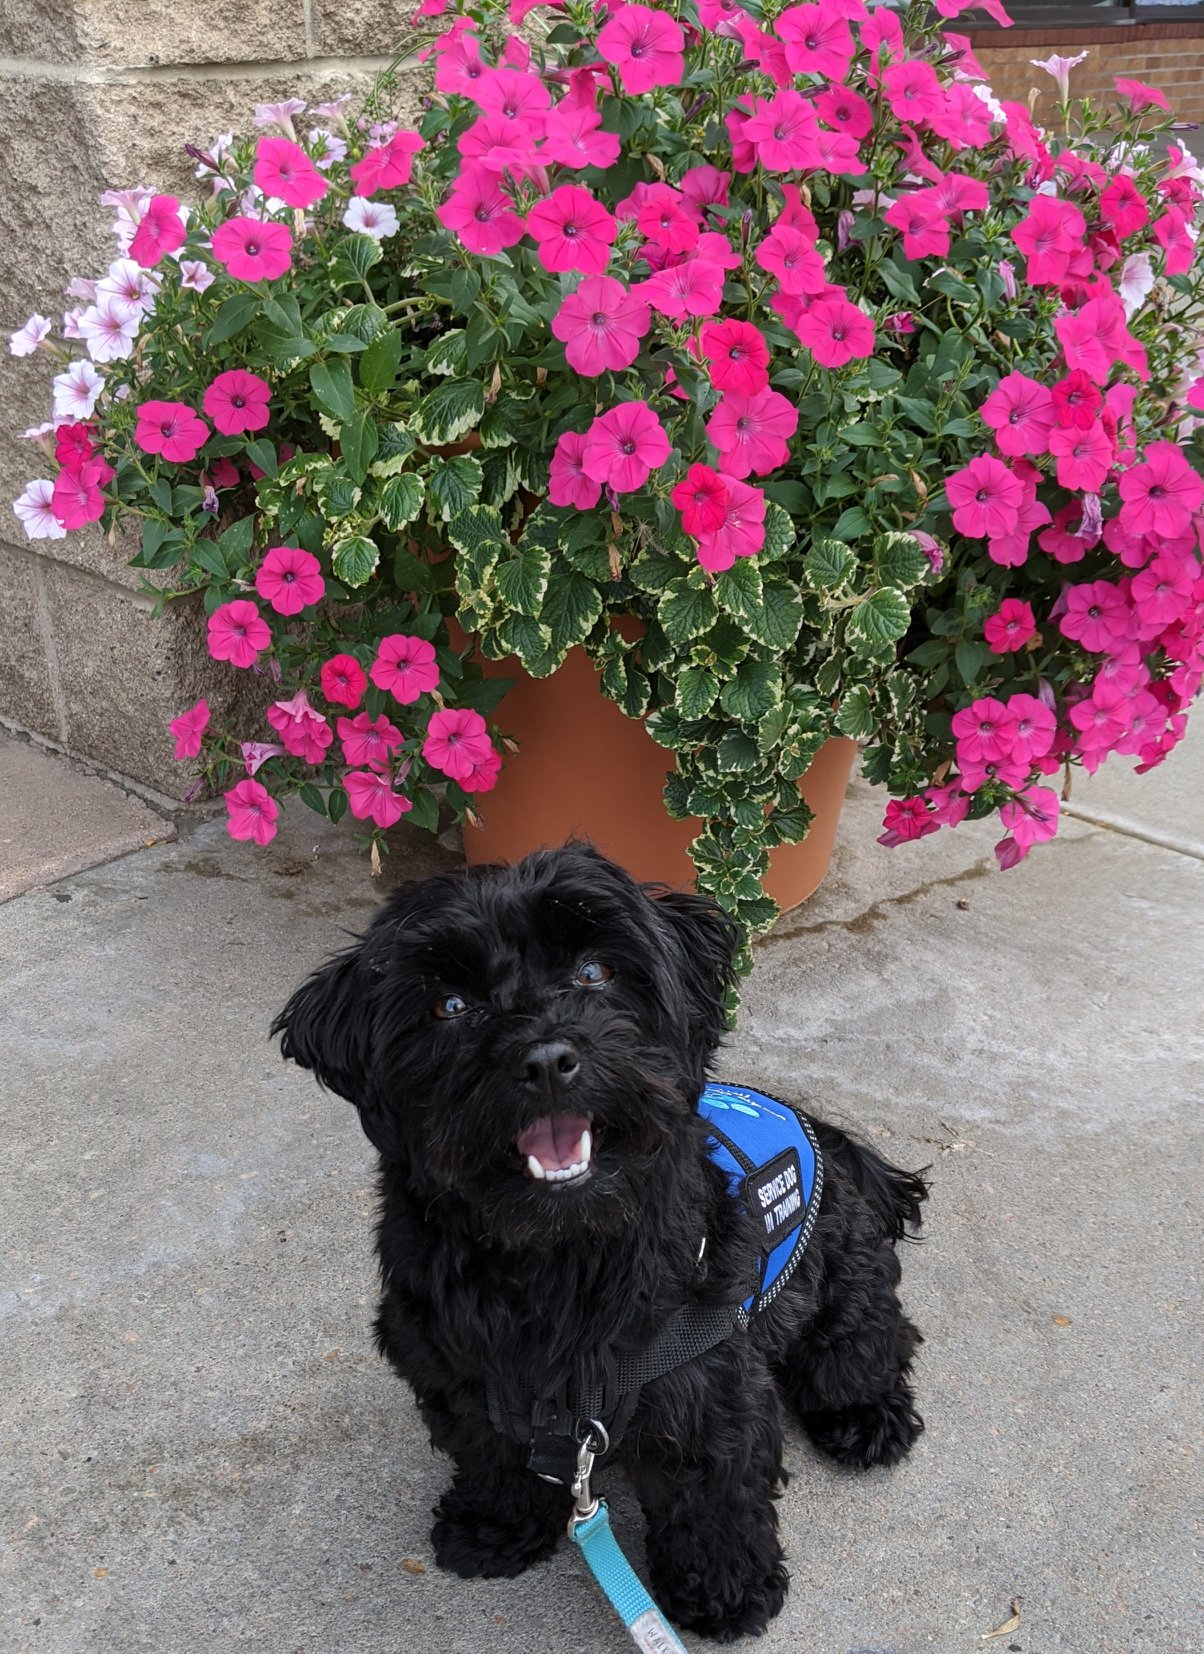 A small Havanese dog with a service dog vest standing in front of a blooming pot of flowers